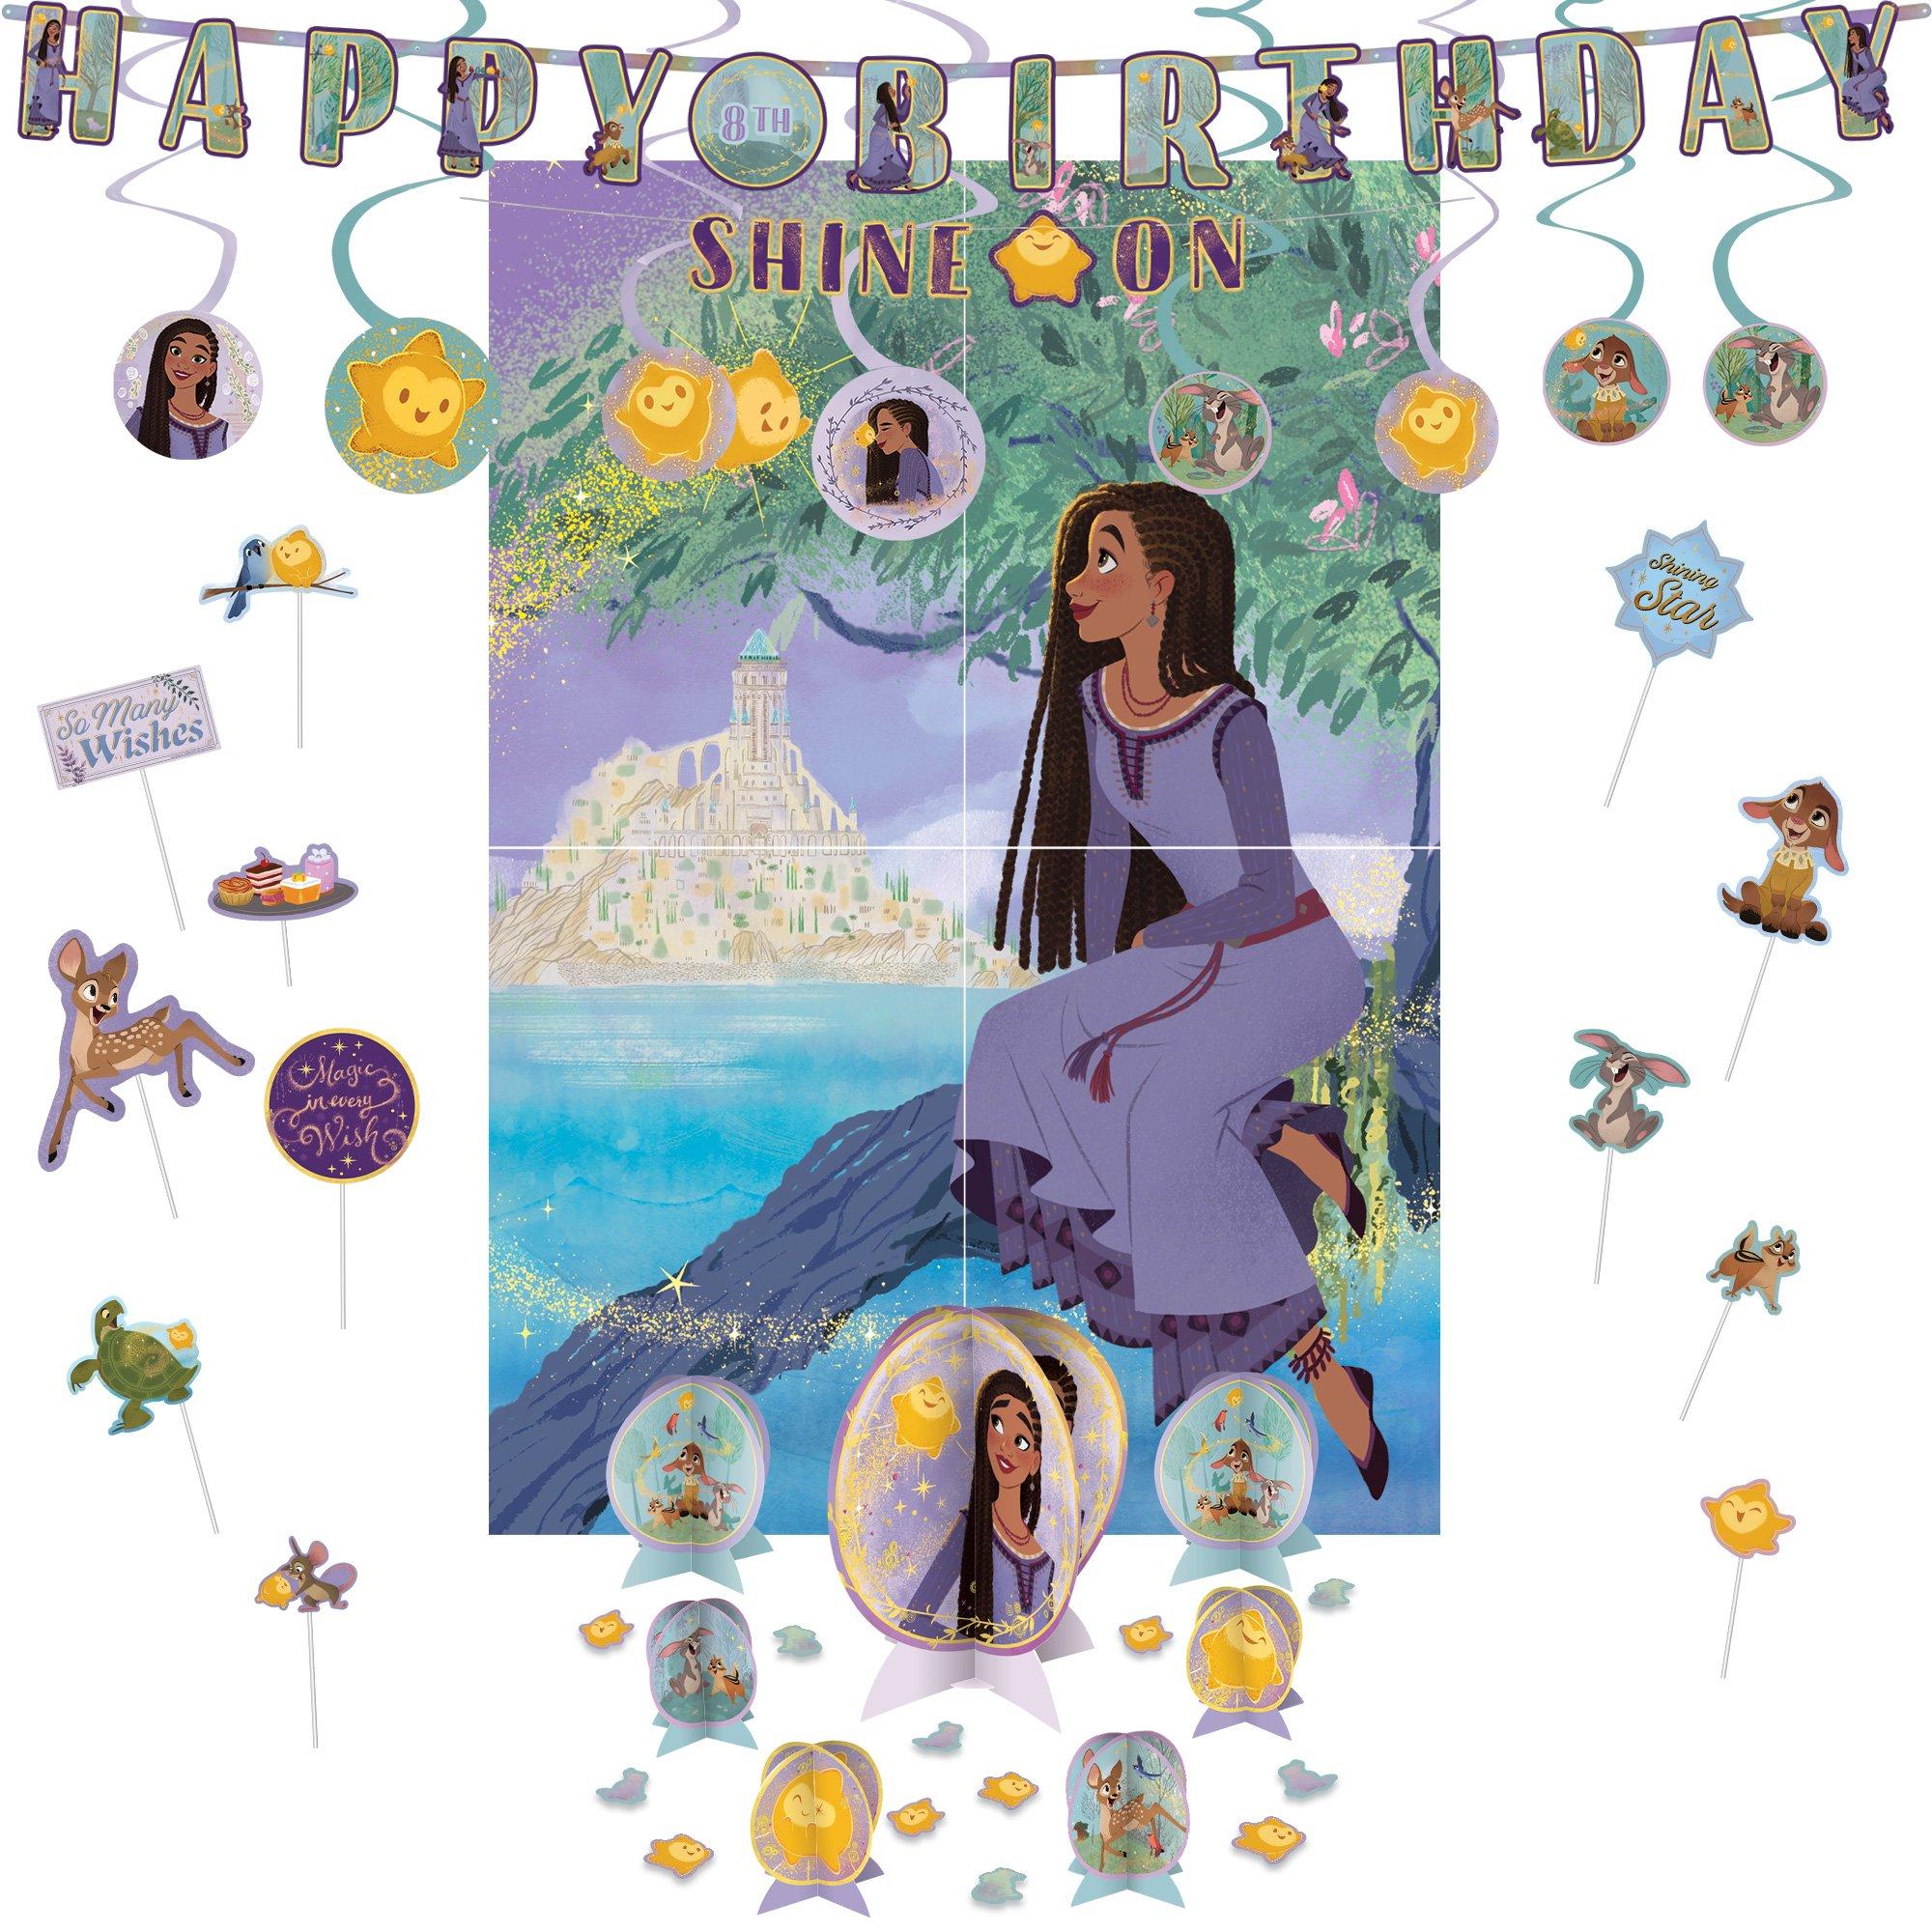 Disney Wish Birthday Party Decorating Supplies Pack - Kit Includes Banner, Table Decorations, Swirls, Scene Setter & Photo Booth Props